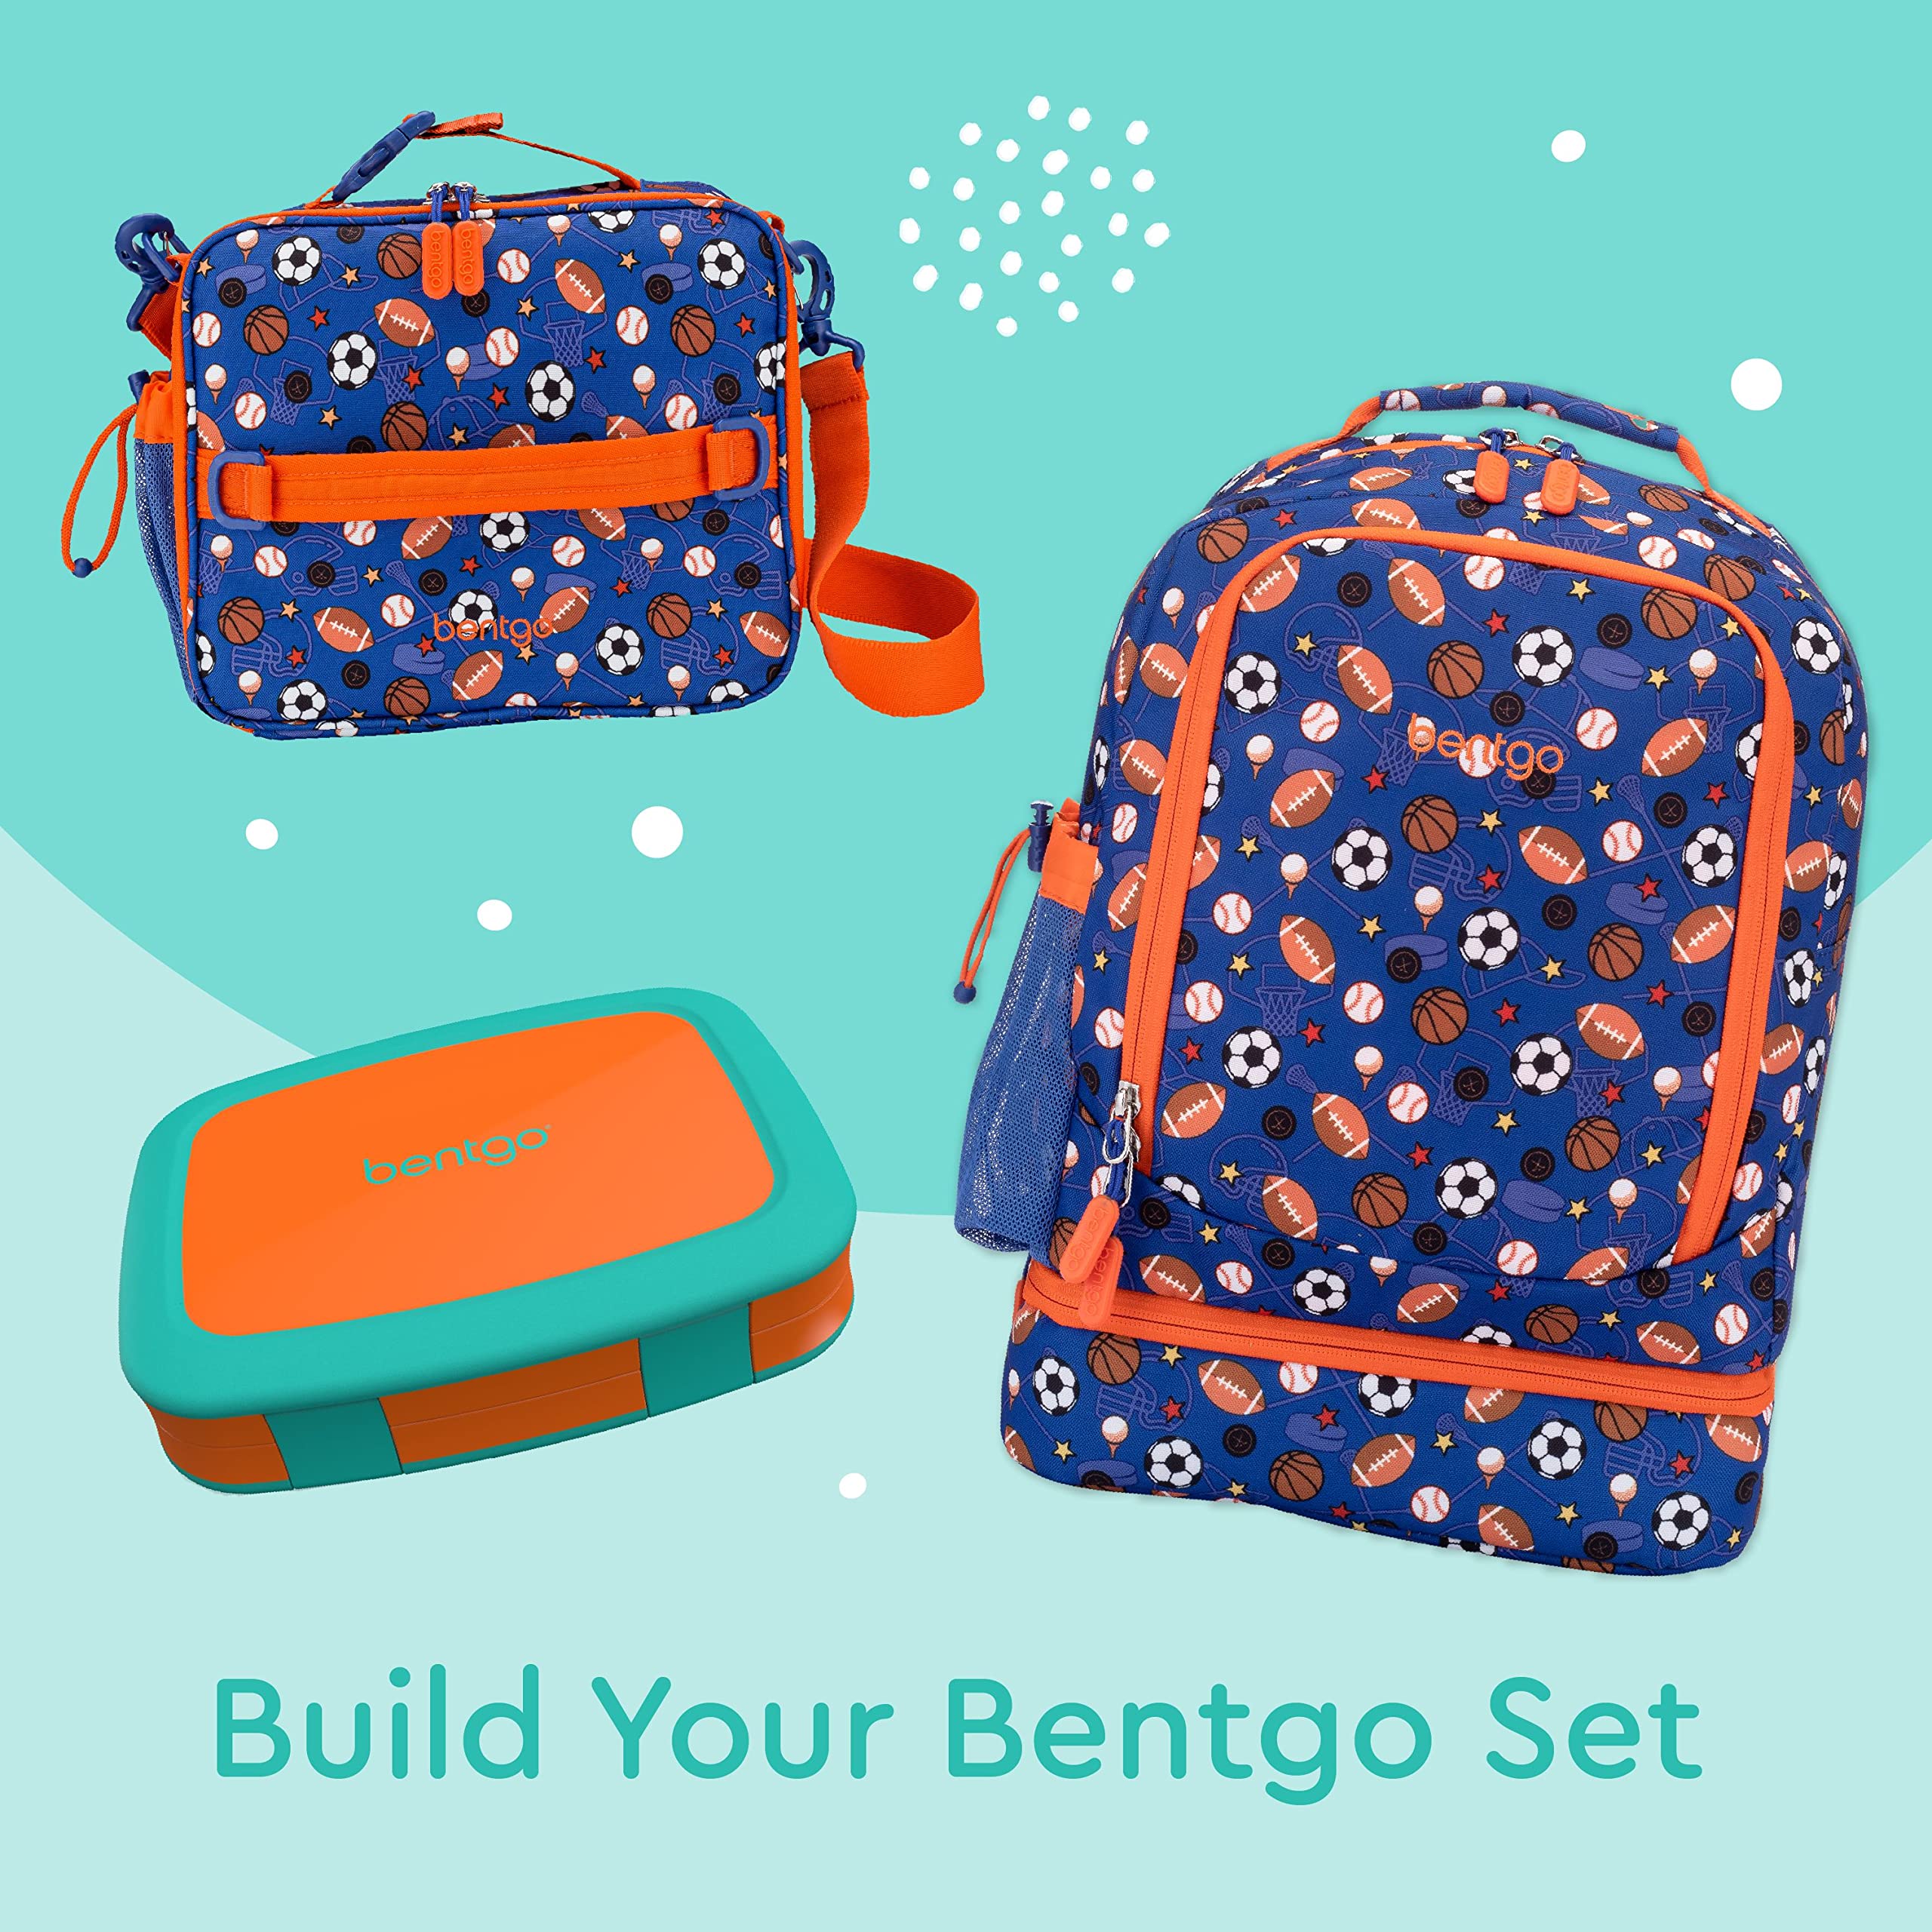 BentgoA Kids Brights Bento-Style 5-compartment Lunch Box - Ideal Portion Sizes for Ages 3 to 7 - Leak-Proof, Drop-Proof, Dishwas